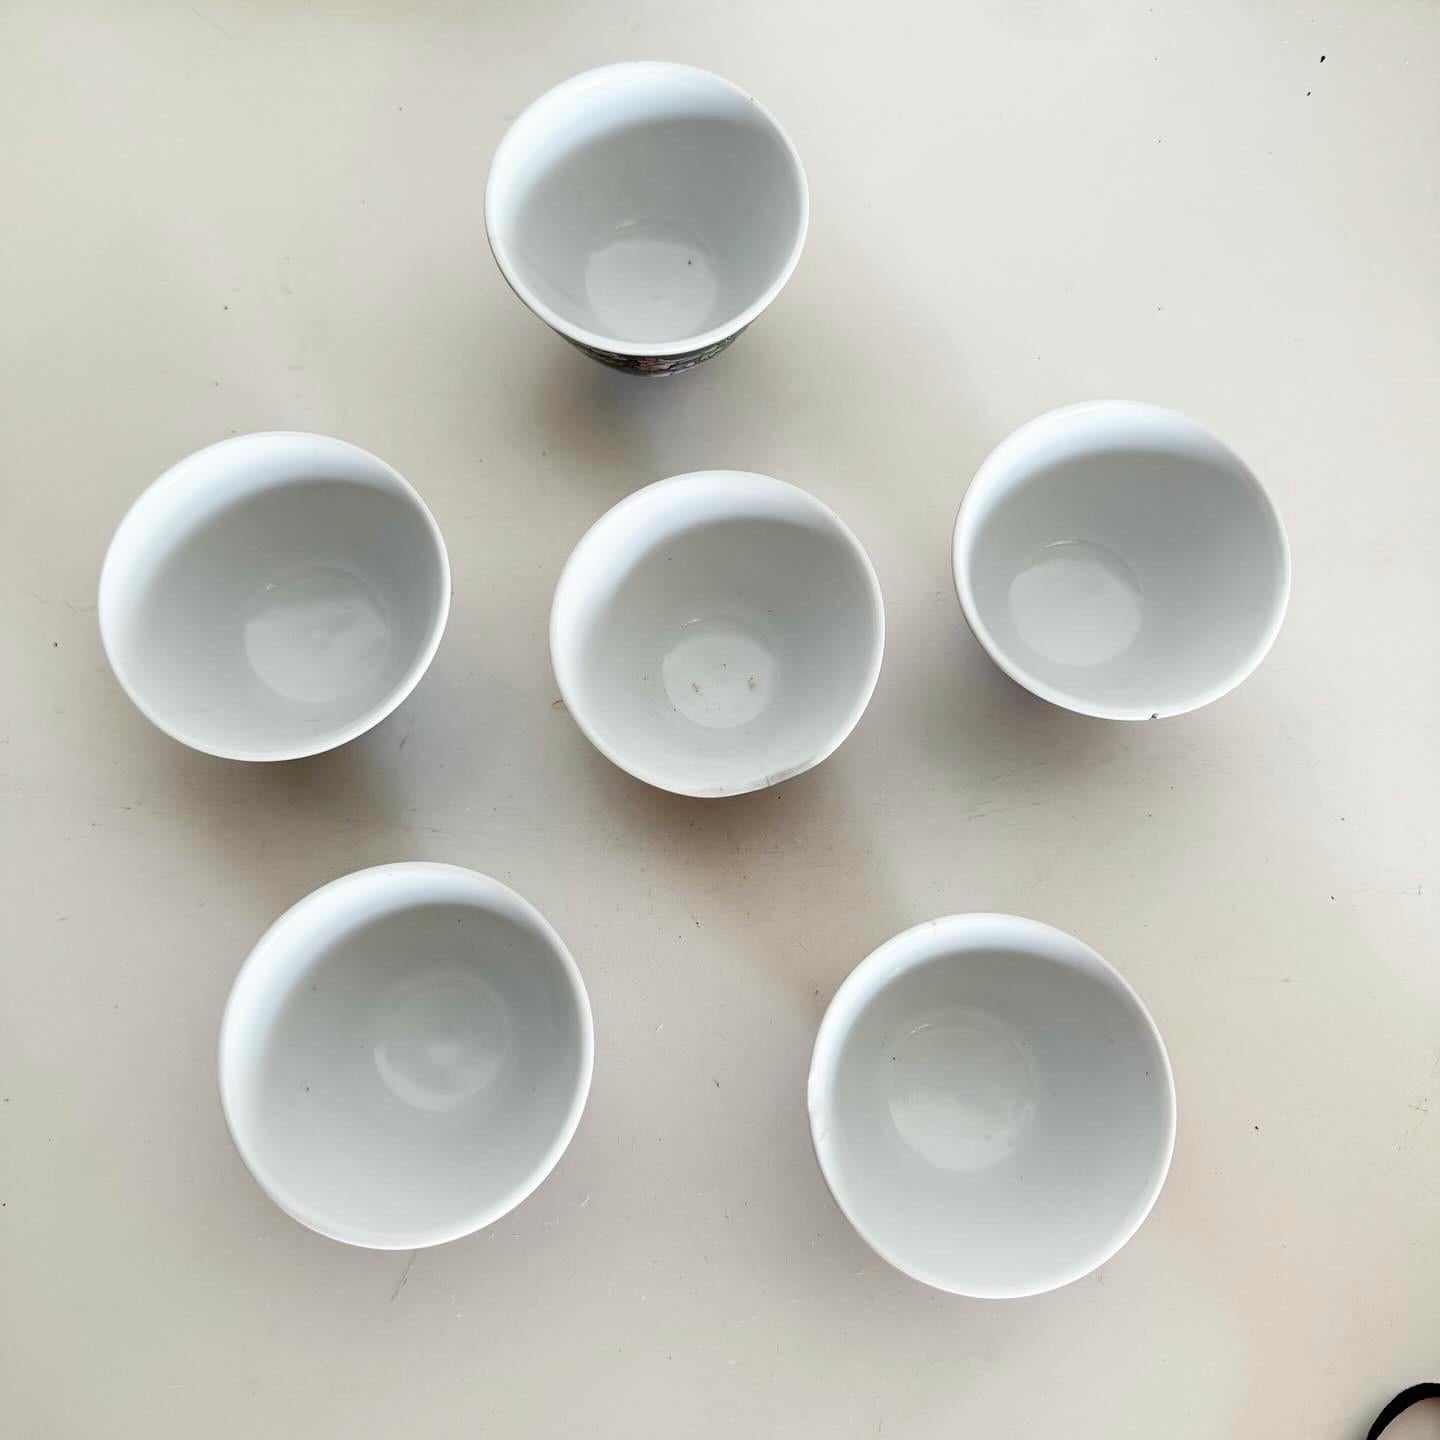 Indulge in the artistry of Vintage Chinese Hand Painted Porcelain Tea Cups, a set of six that celebrates traditional tea culture. Each cup showcases the exquisite craftsmanship of Chinese porcelain, featuring intricate designs and vibrant colors.